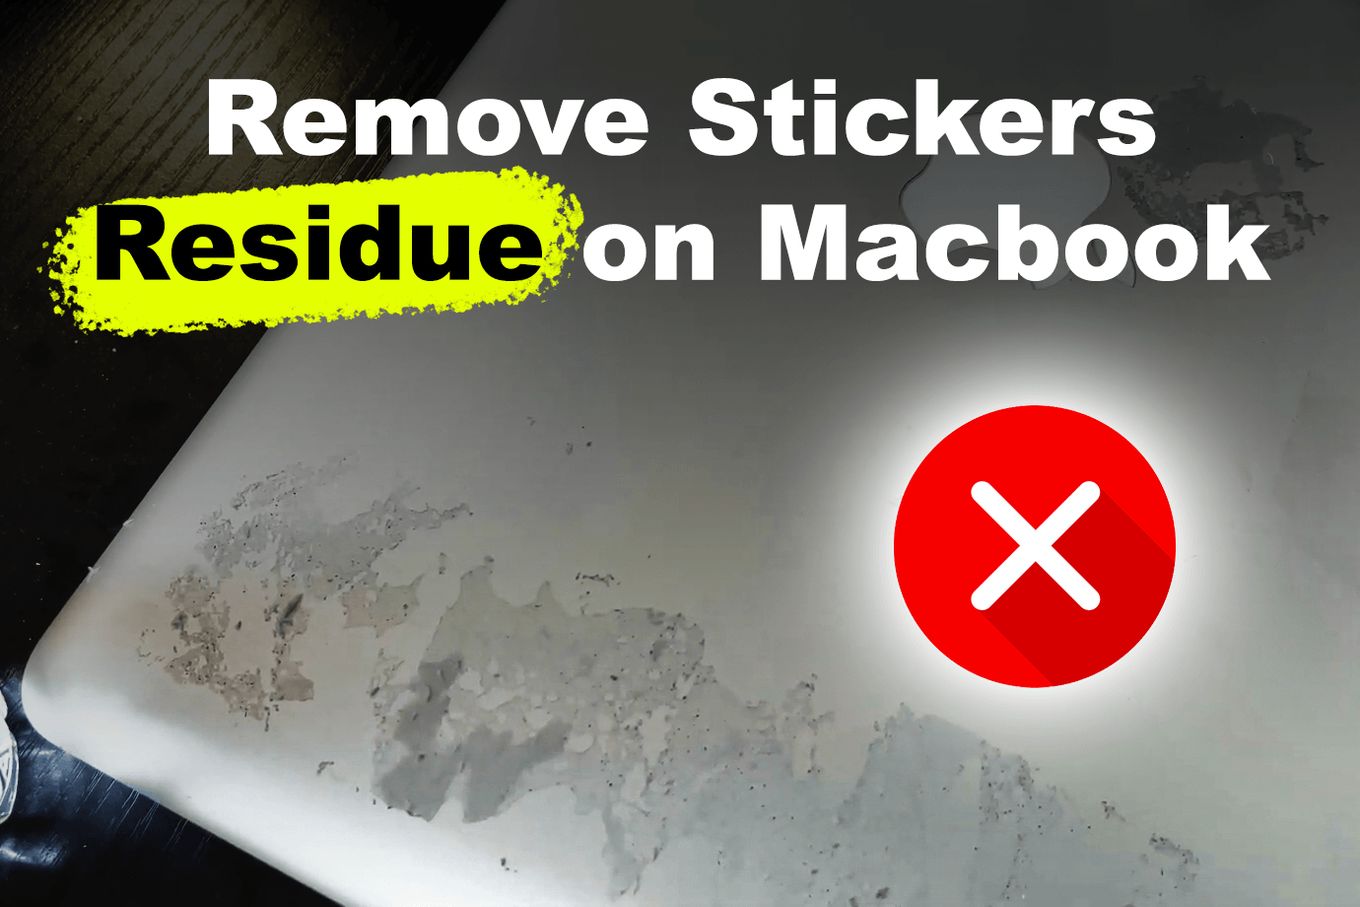 How to avoid stickers residue on MacBooks